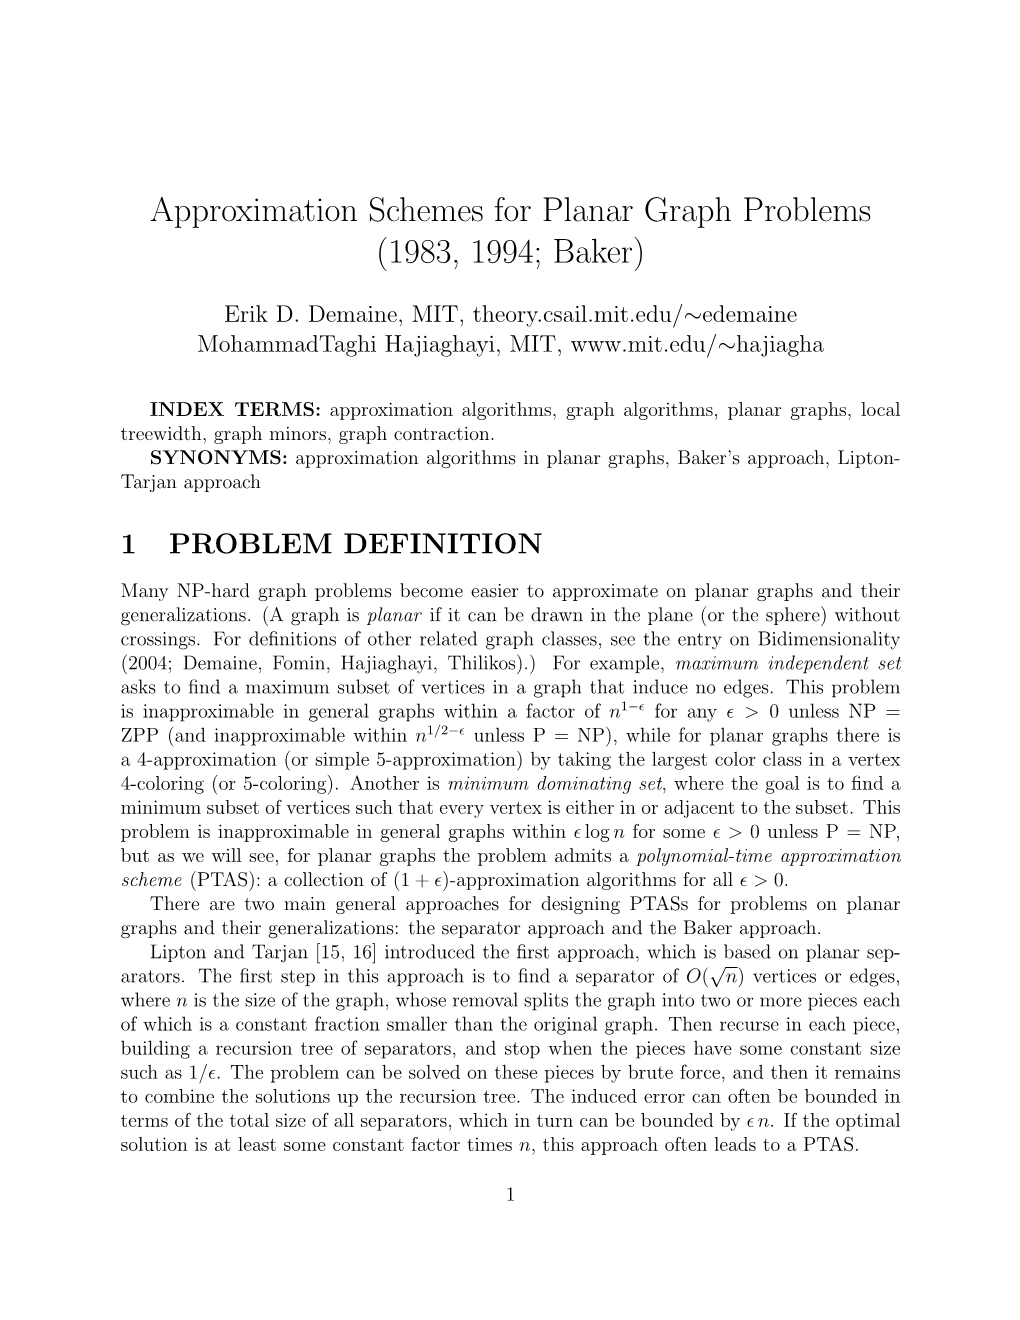 Approximation Schemes for Planar Graph Problems (1983, 1994; Baker)